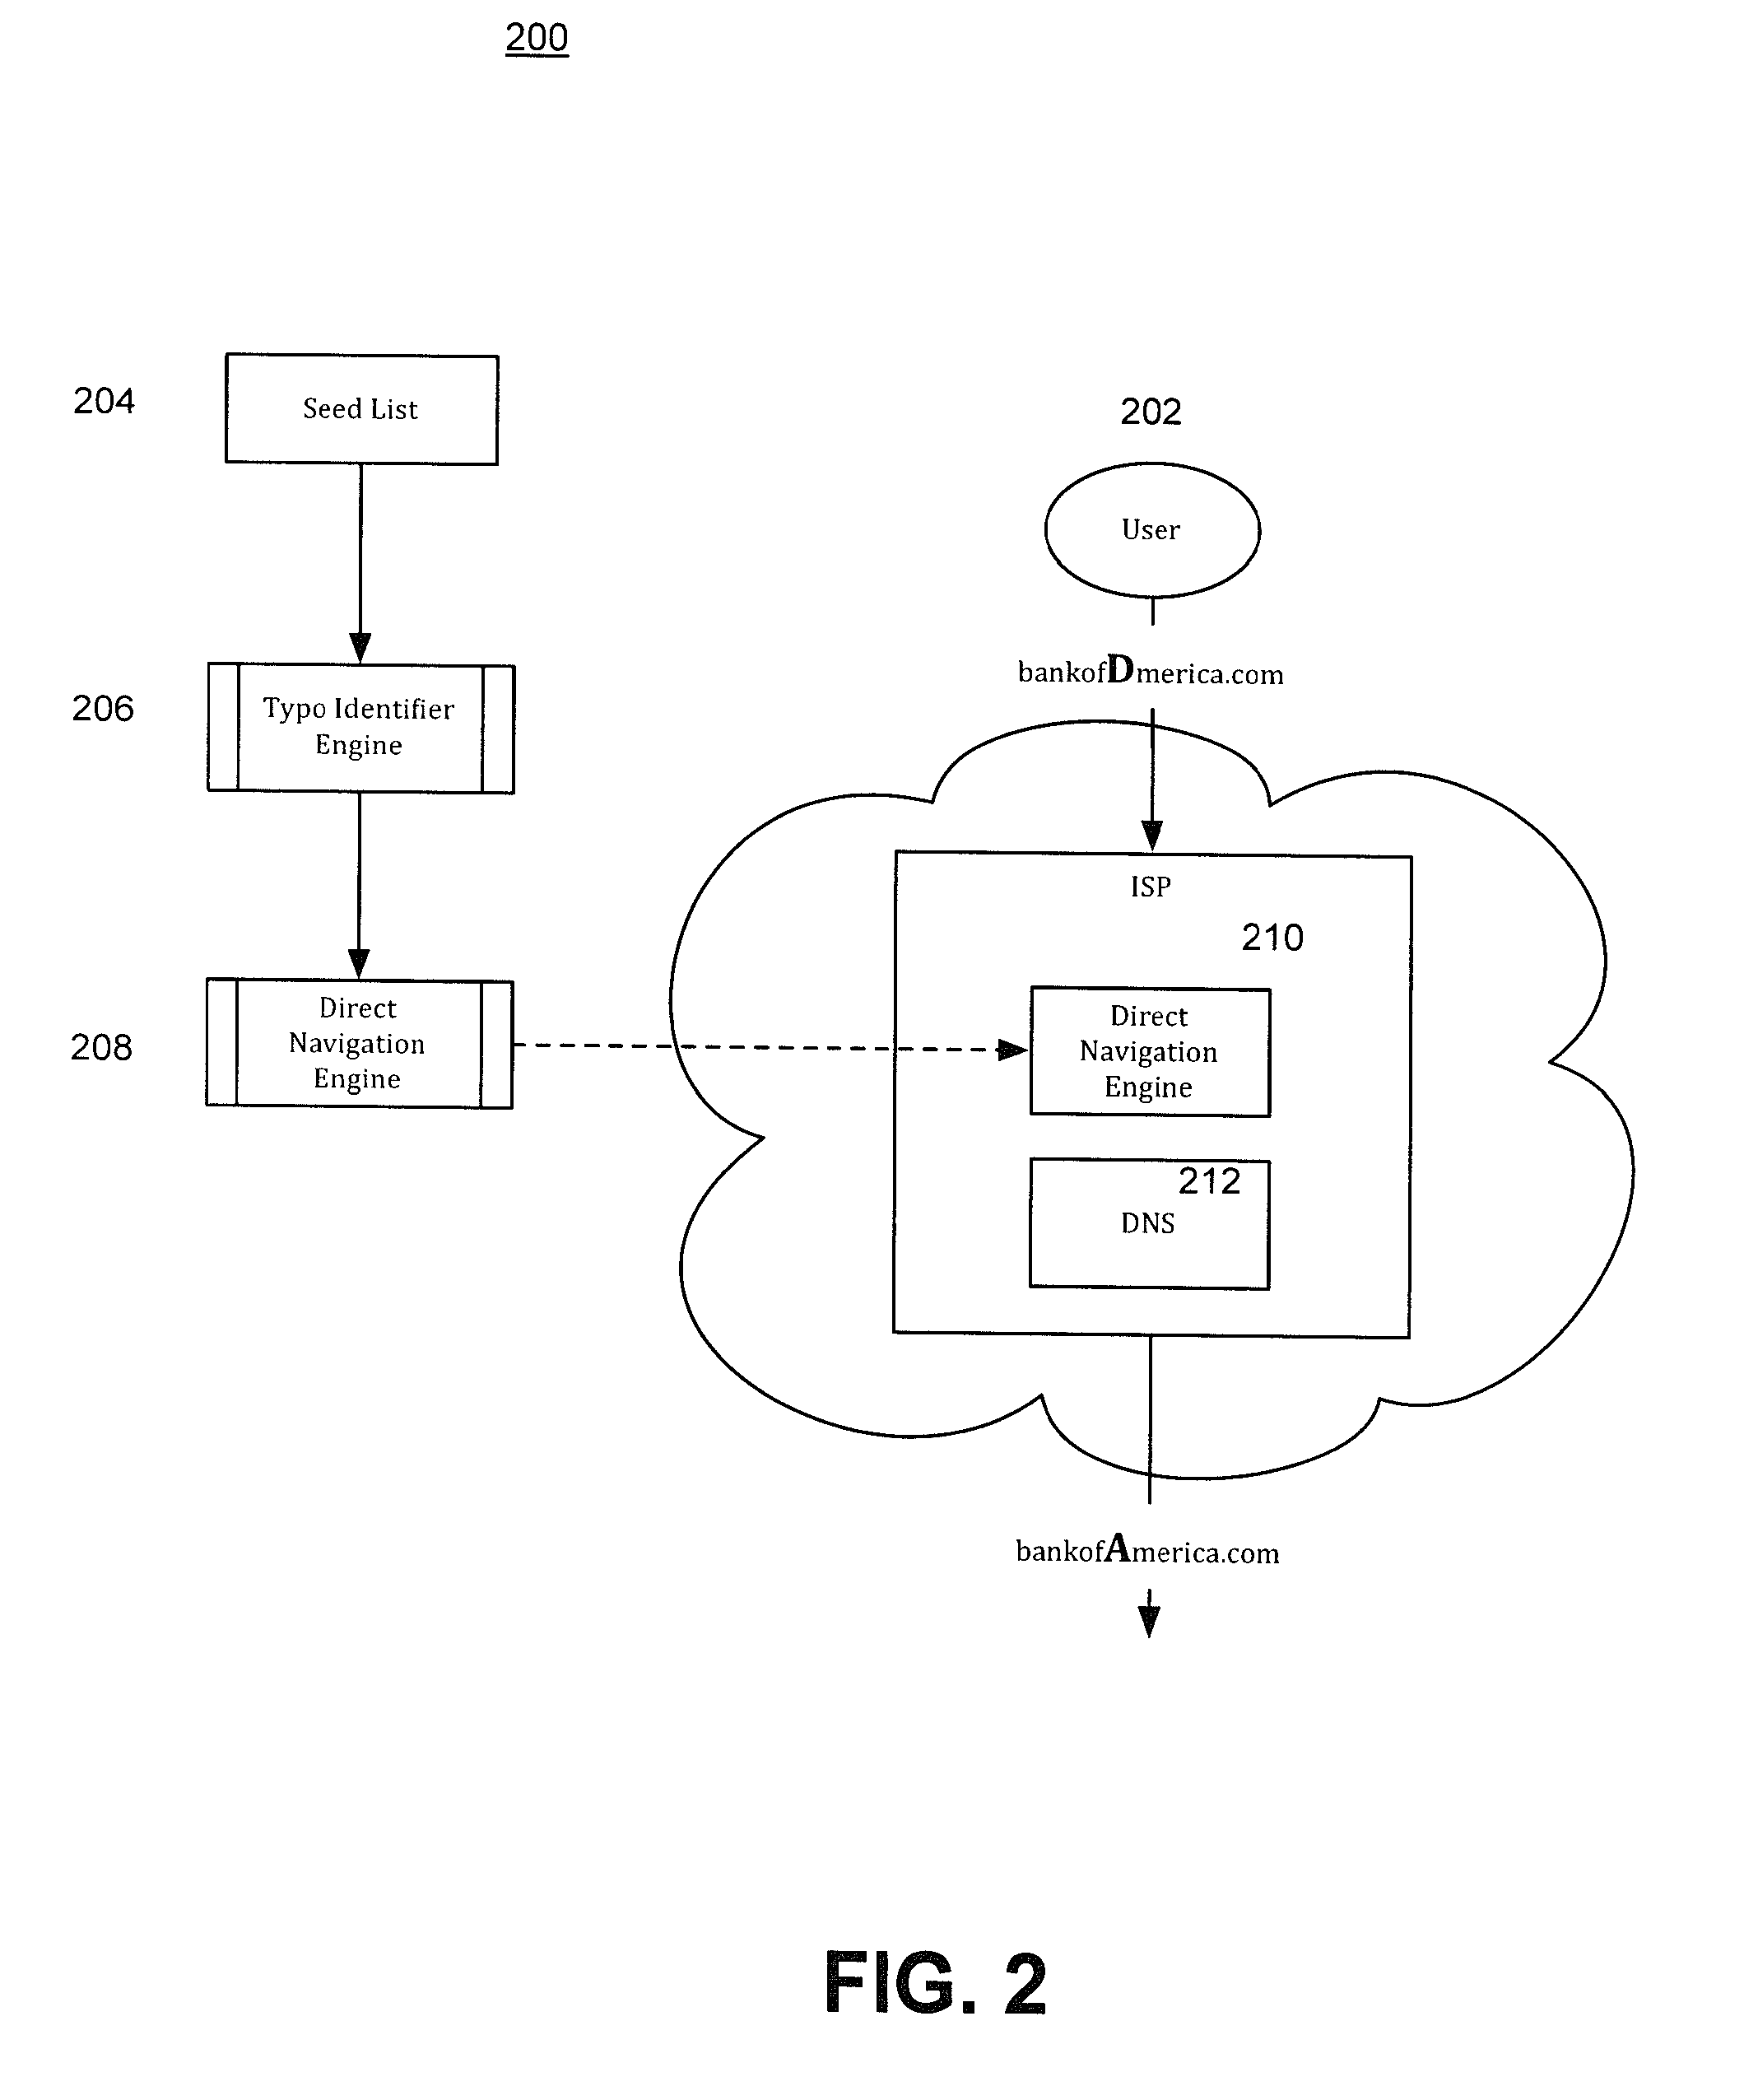 Method and system for monitoring and redirecting HTTP requests away from unintended web sites